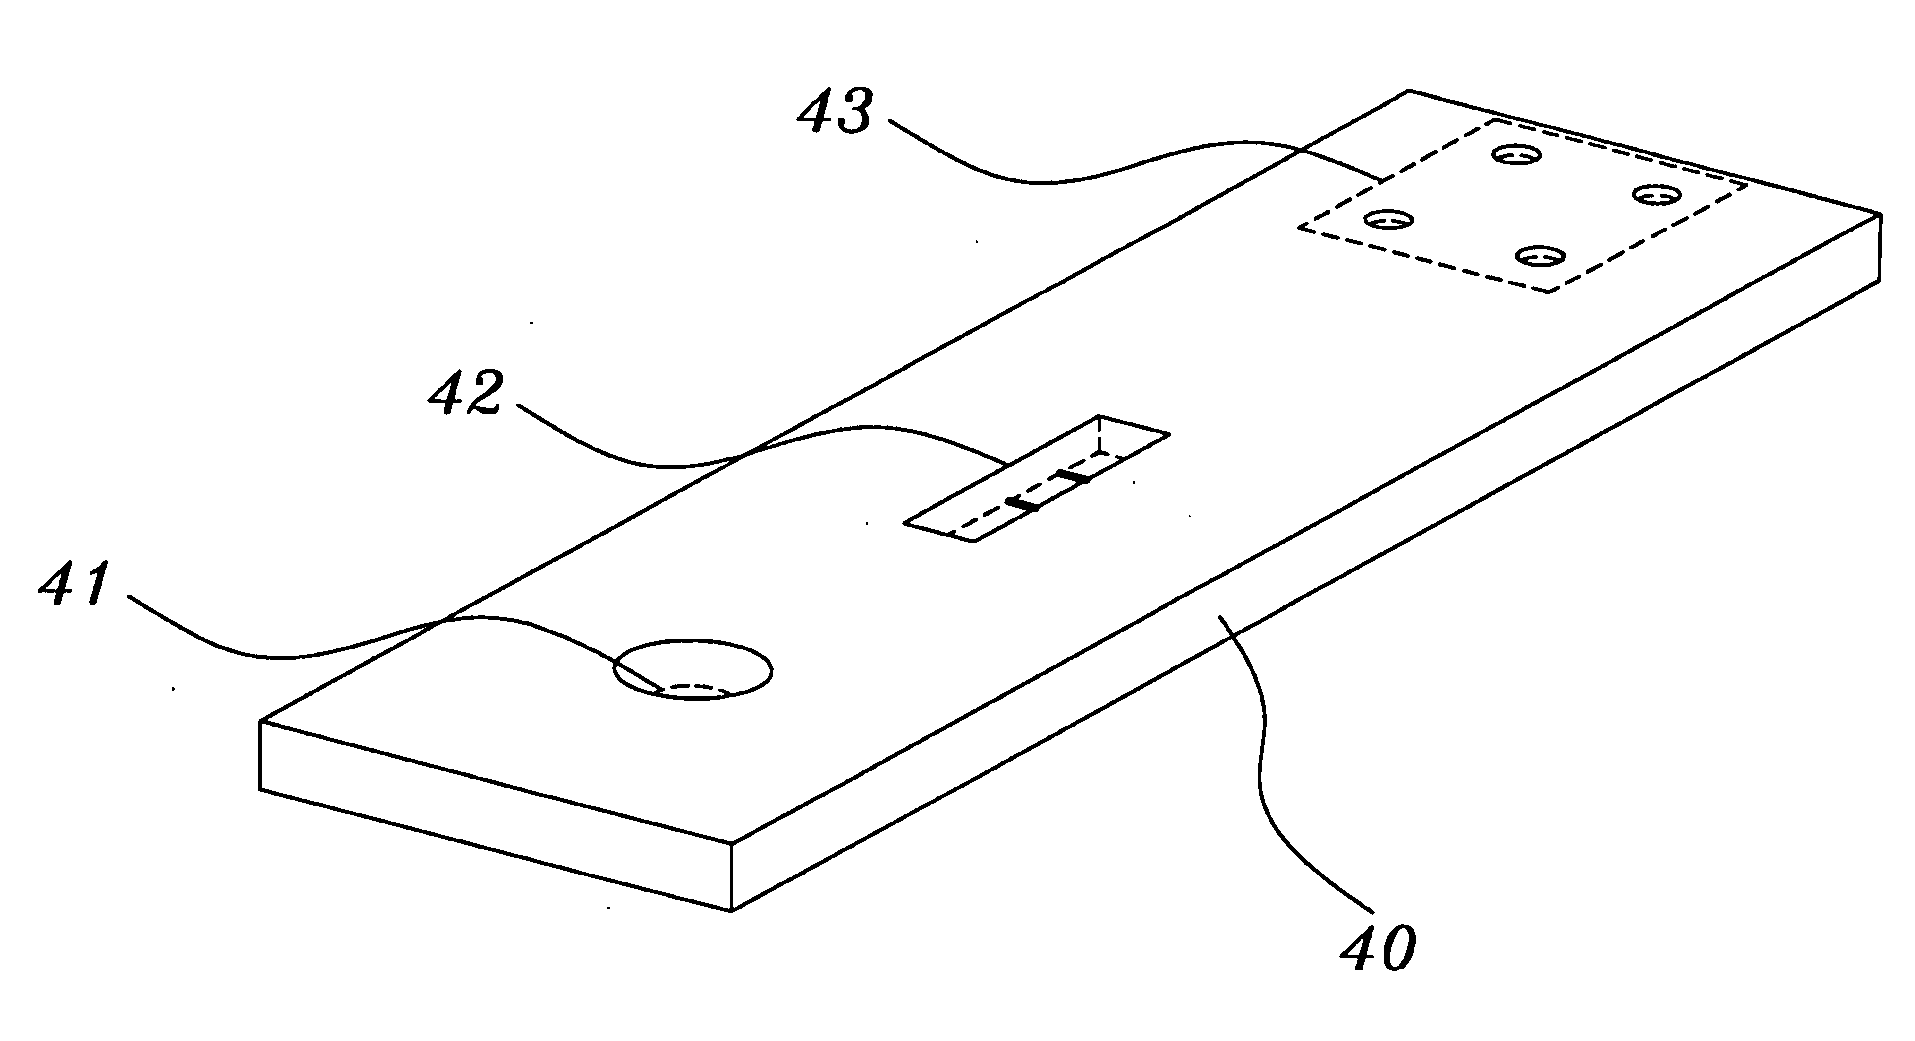 Test strip with identification openings and test instrument using the same